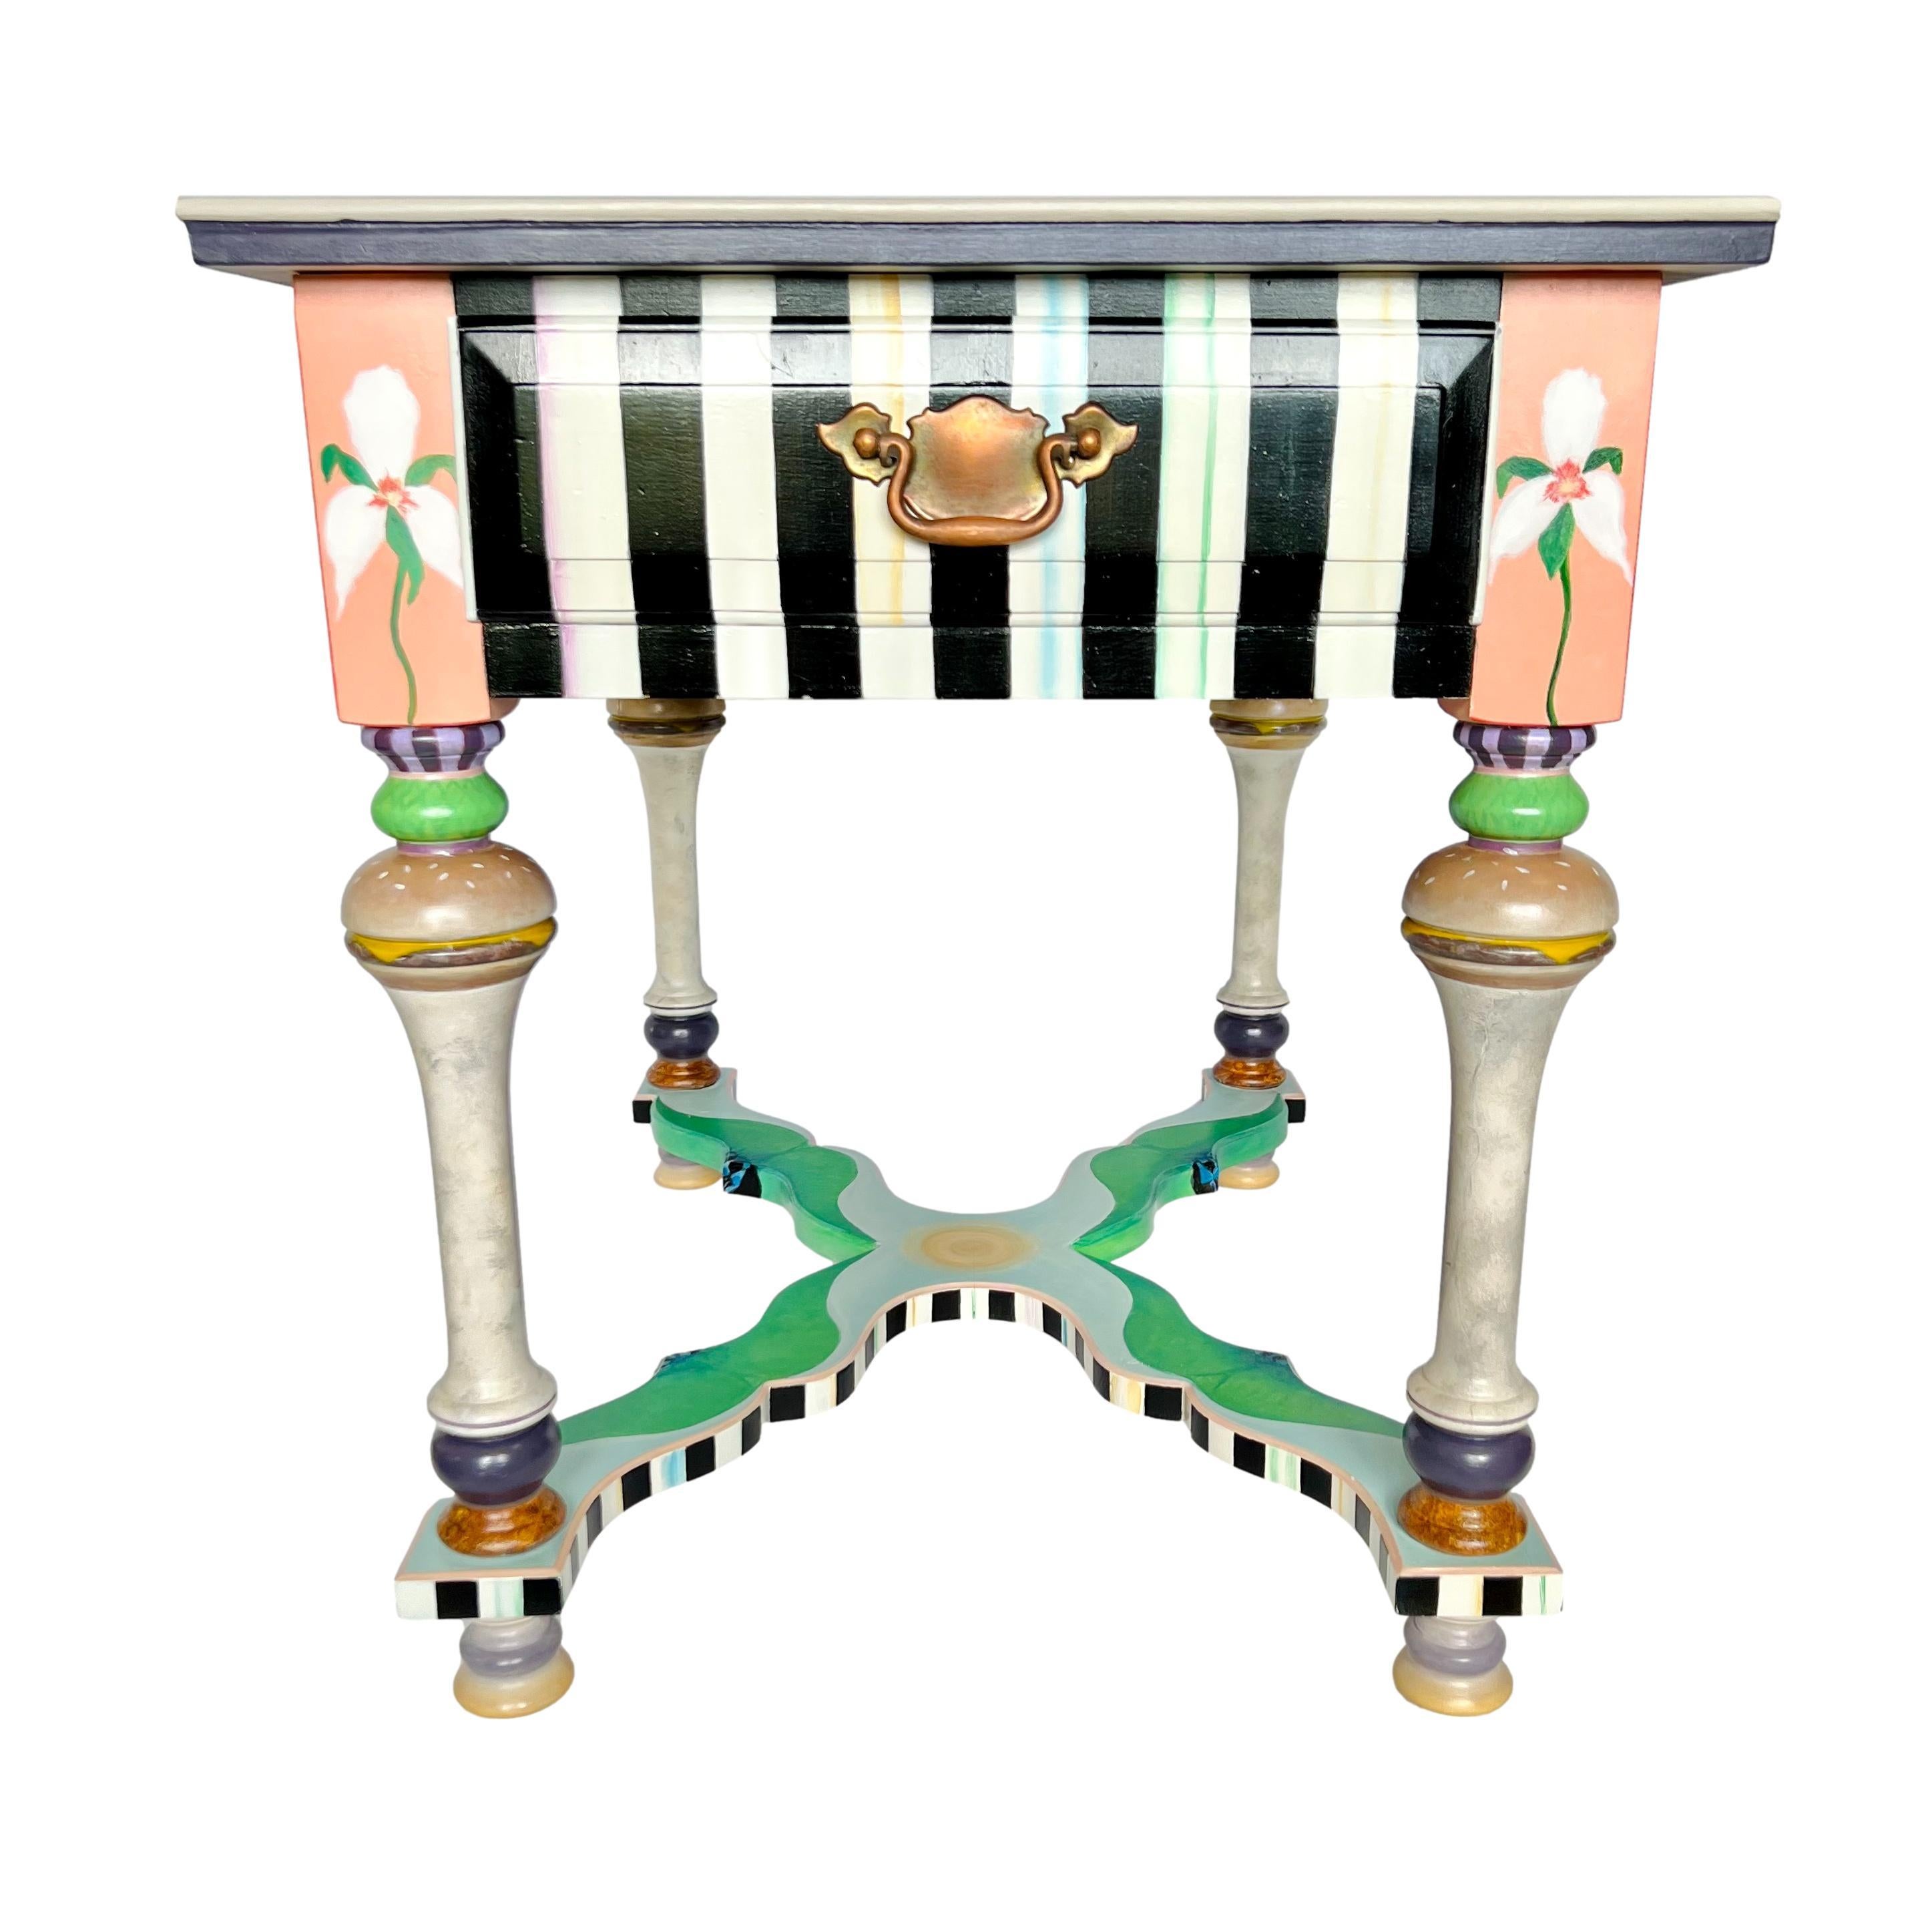 Butterfly, burgers & birds - This vintage Tell City Young Republic rock maple end table has been given a one-of-a-kind hand painted update in the manner of MacKenzie-Childs. From the top we have a pearly gray or greige surface adorned with a